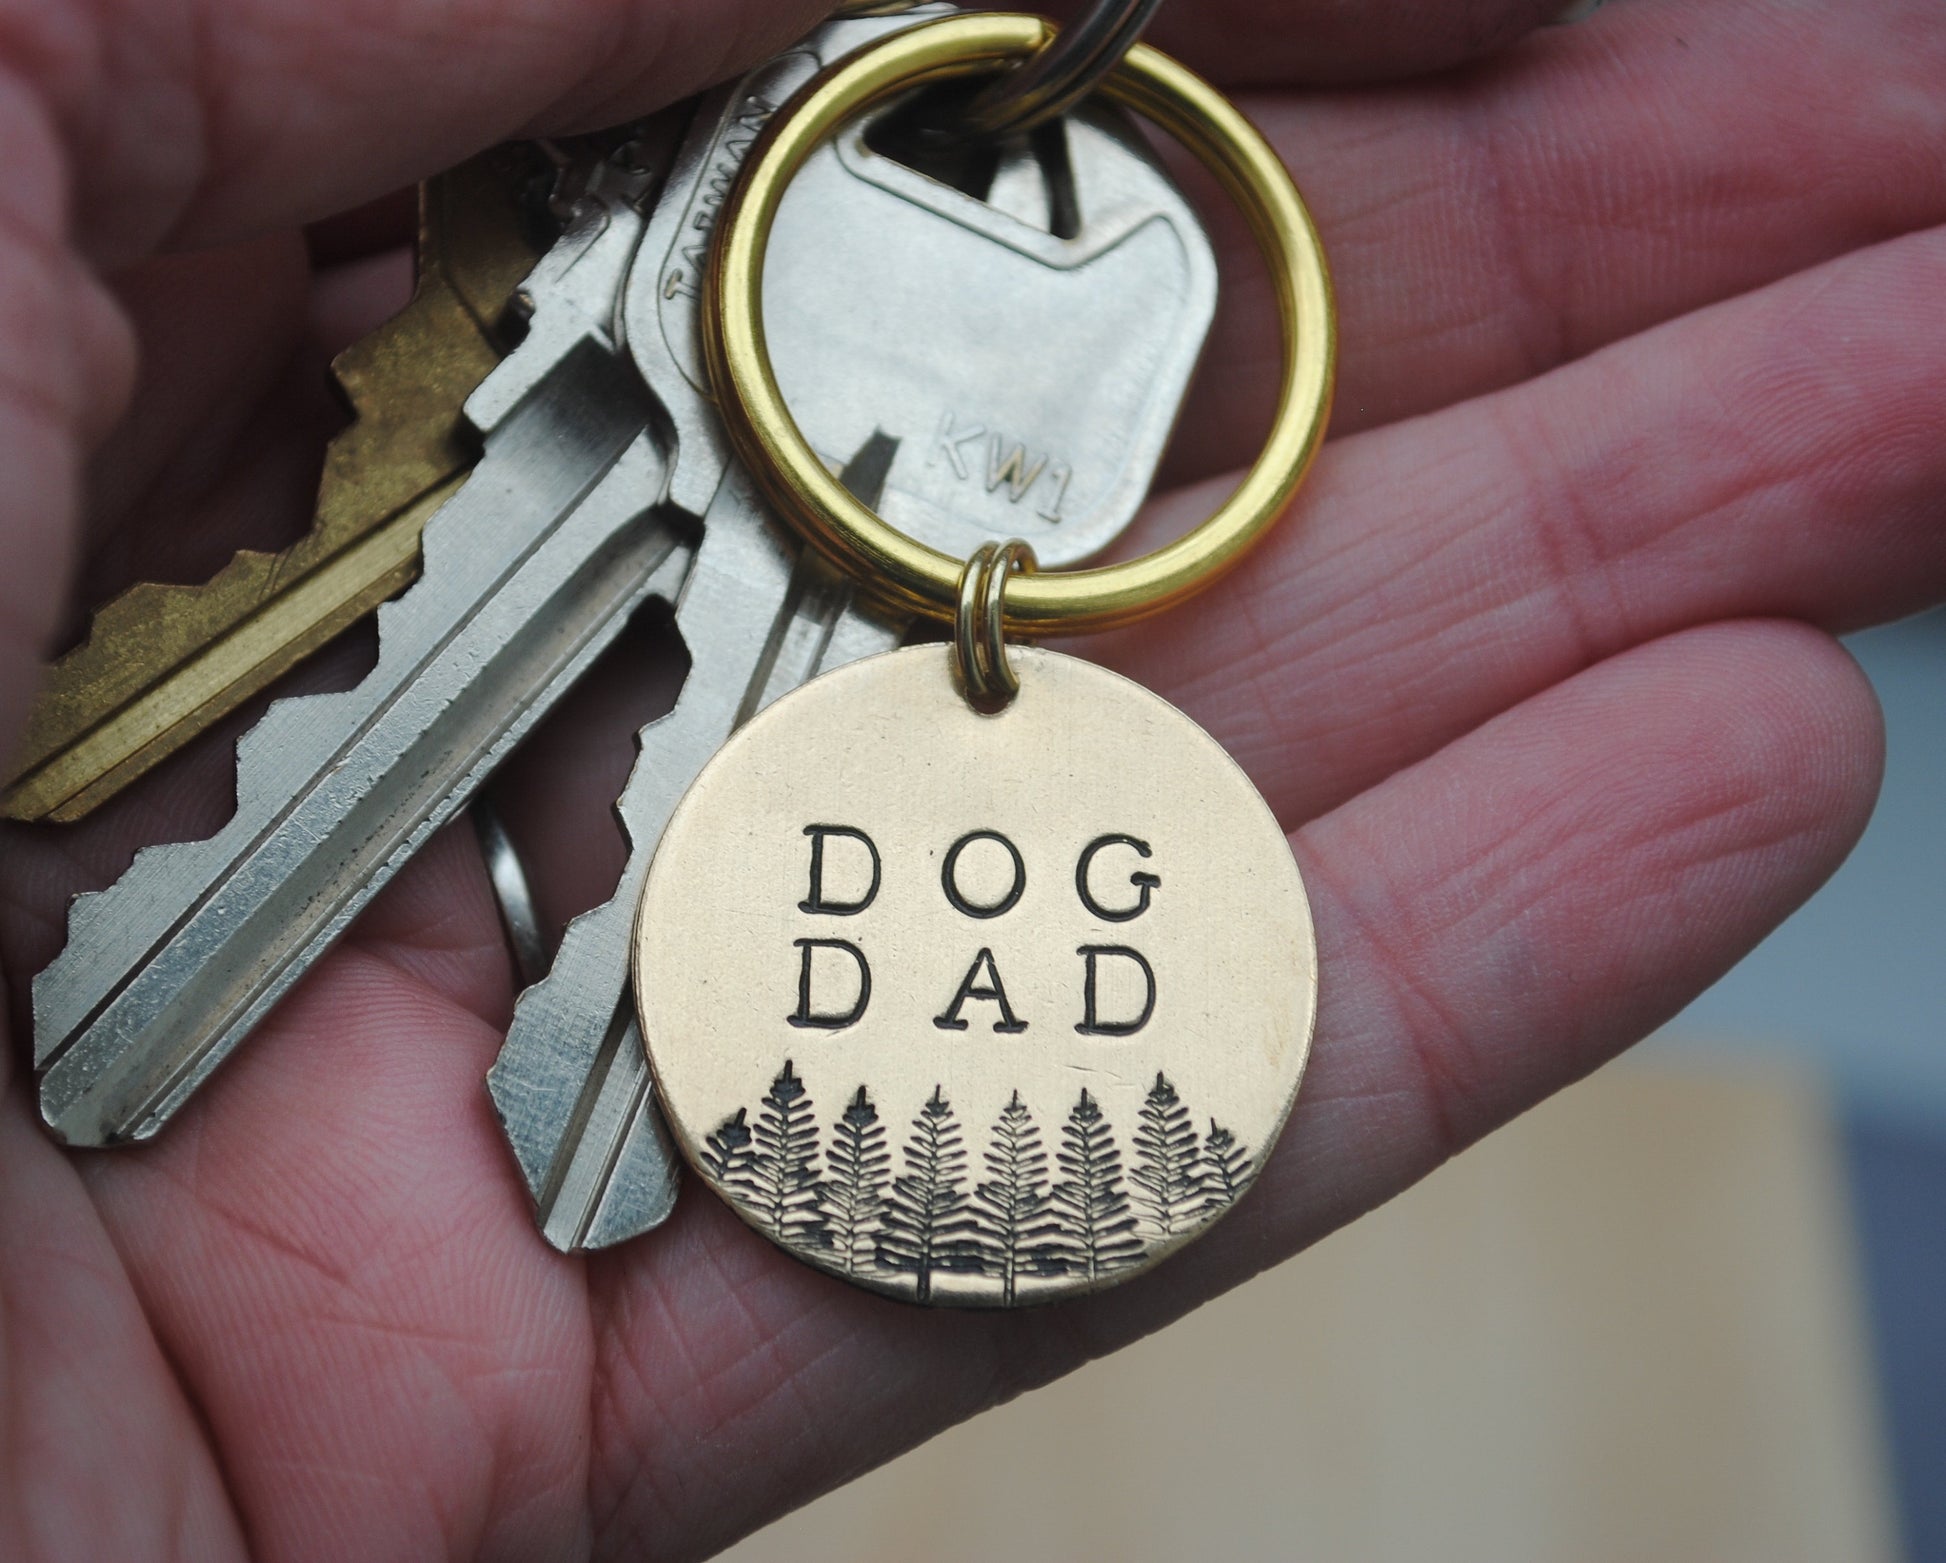 Dog Dad Keychain - Dog Dad Gift - Gift for Him - Pet Parents Gift - Fur Dad - Dog Dad Keytag - Gift for Couples - Cat Dad Gift - Unique Gift